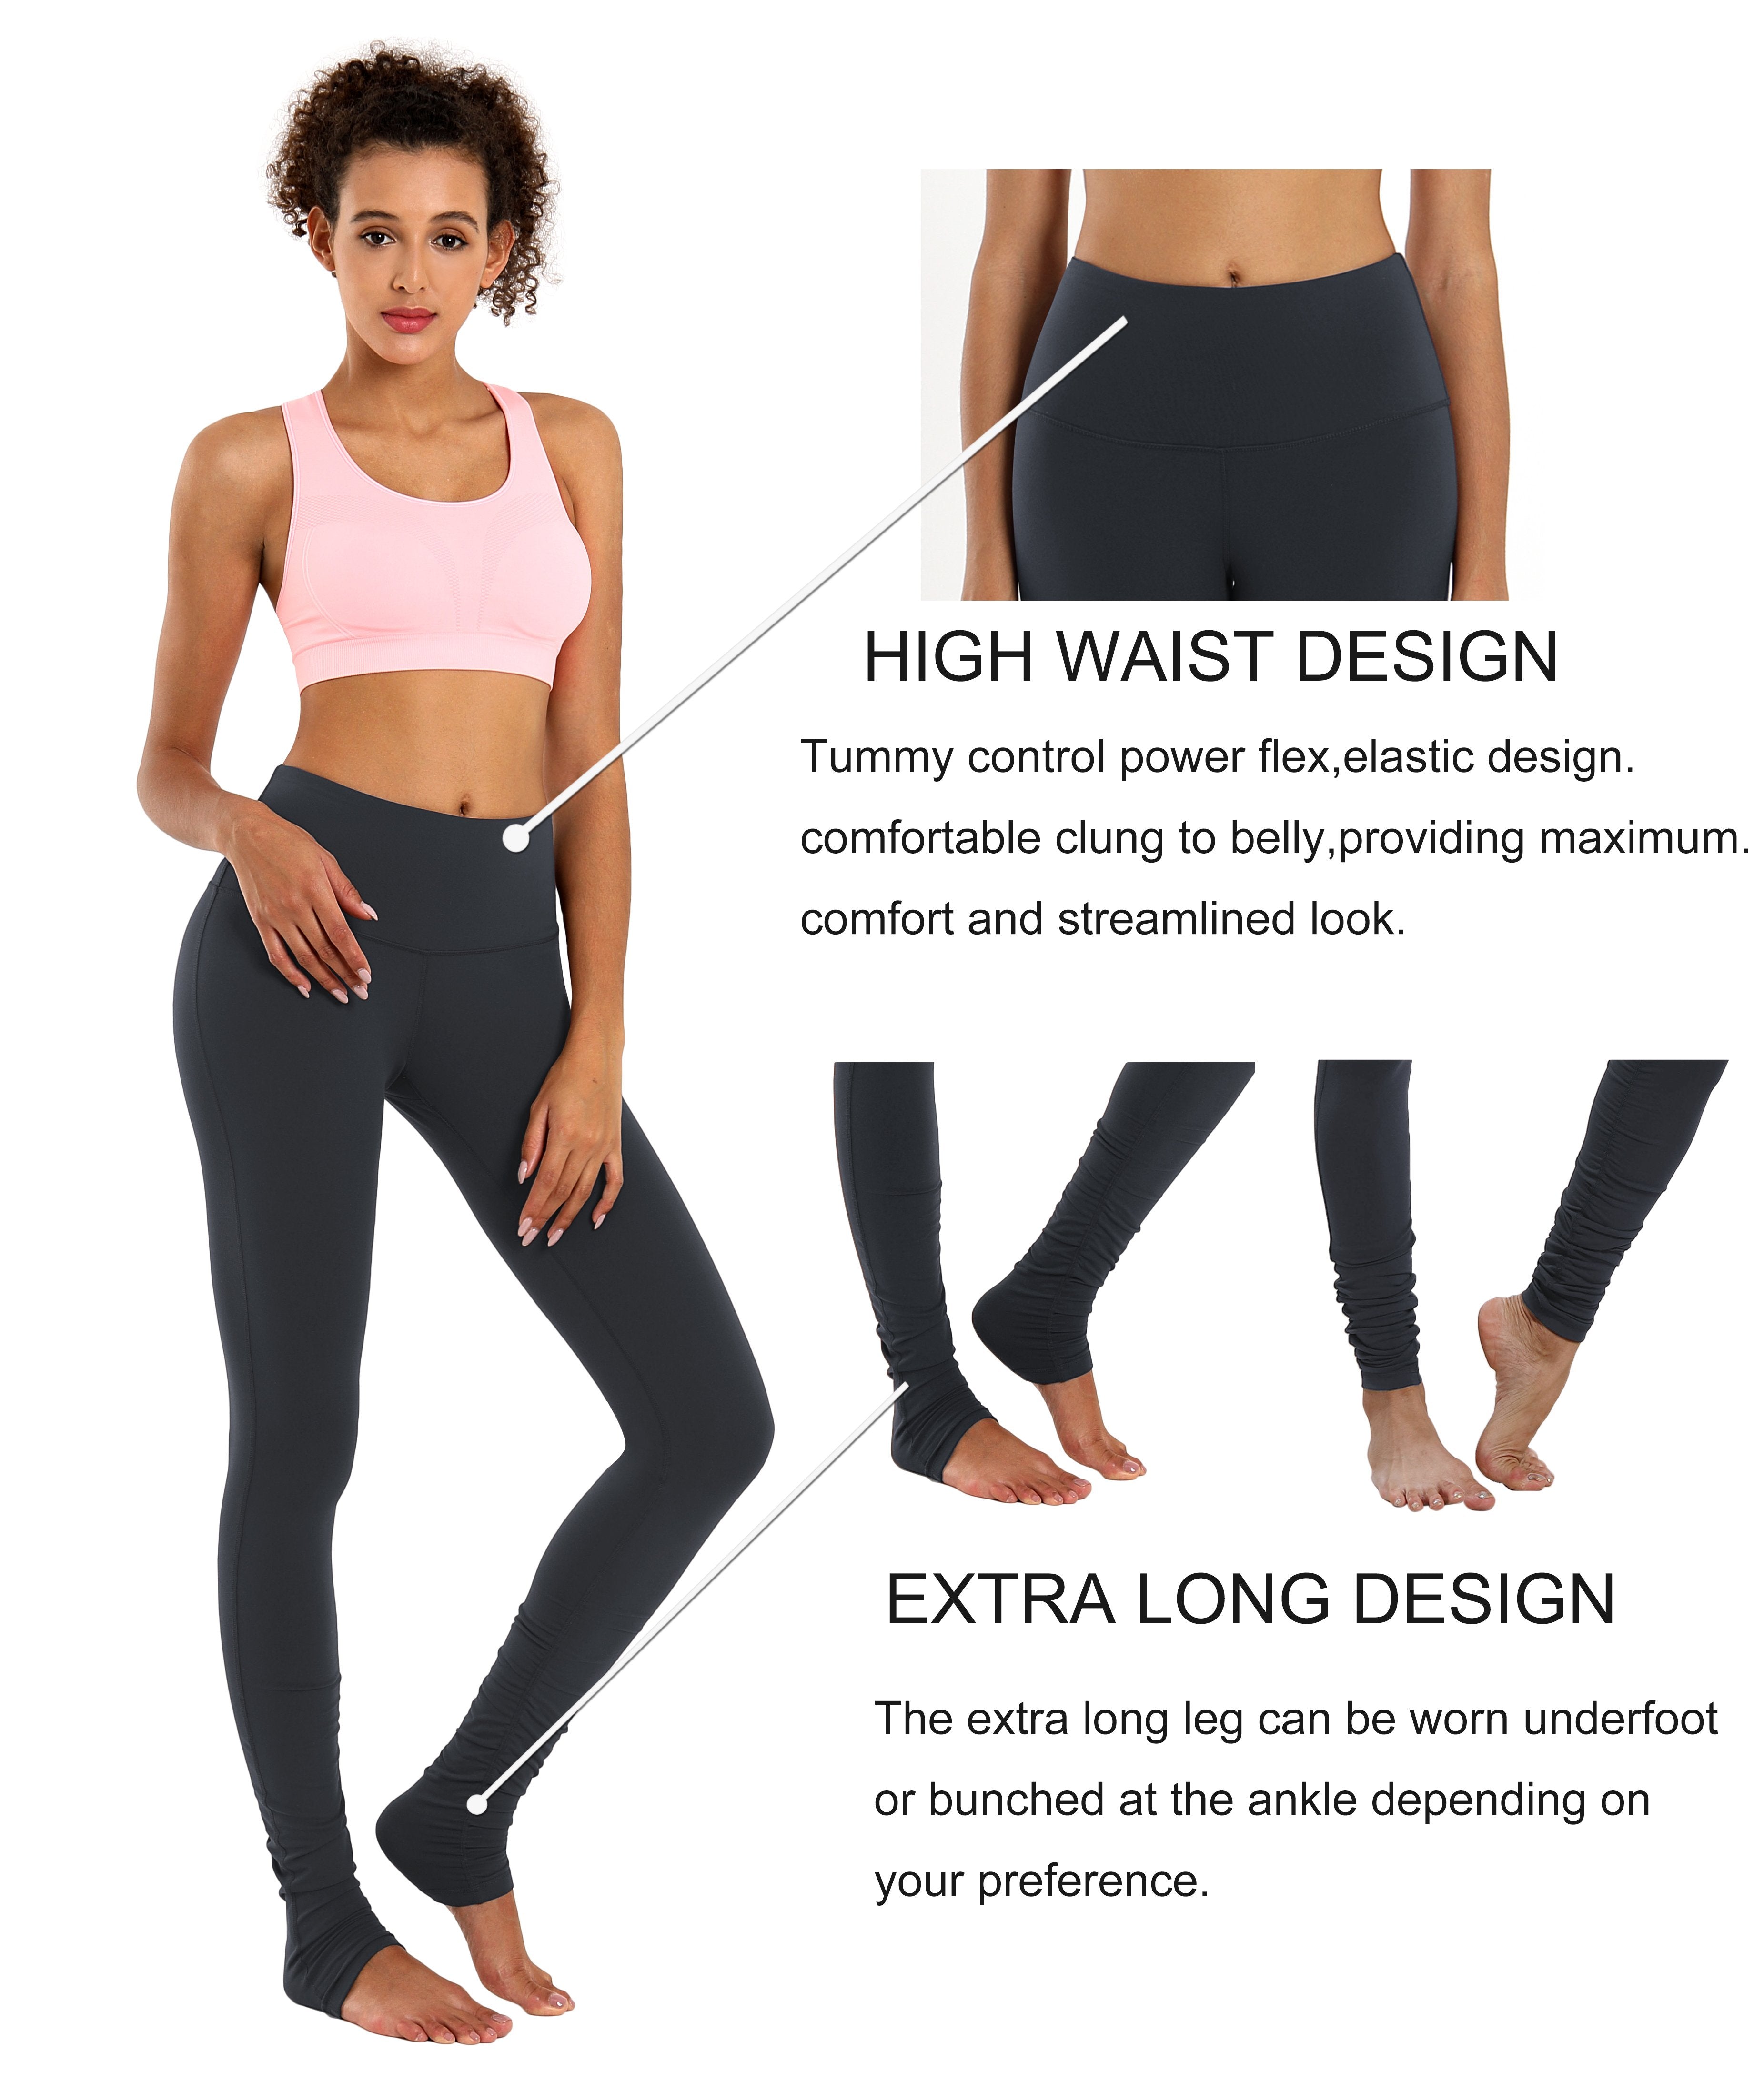 Over the Heel Jogging Pants shadowcharcoal Over the Heel Design 87%Nylon/13%Spandex Fabric doesn't attract lint easily 4-way stretch No see-through Moisture-wicking Tummy control